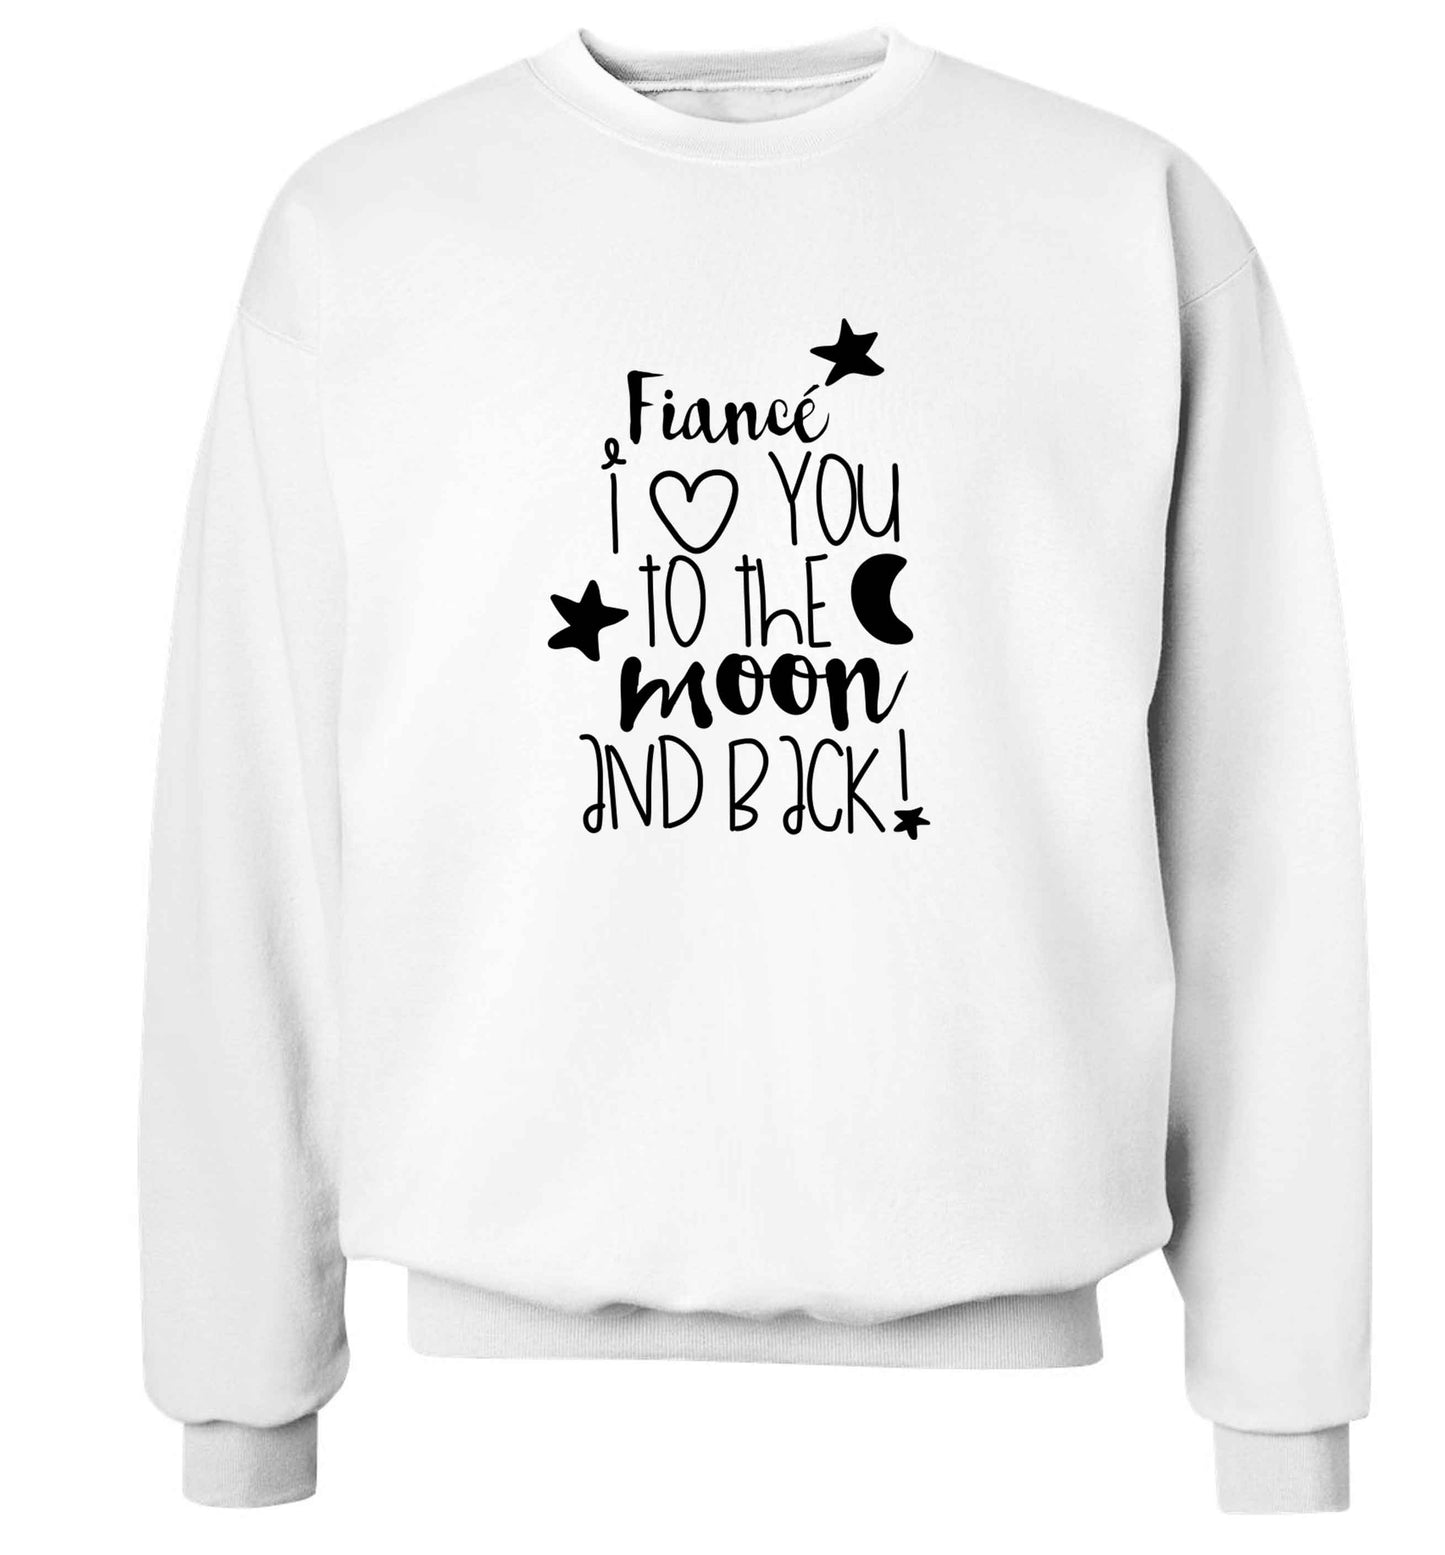 Fiancé I love you to the moon and back adult's unisex white sweater 2XL